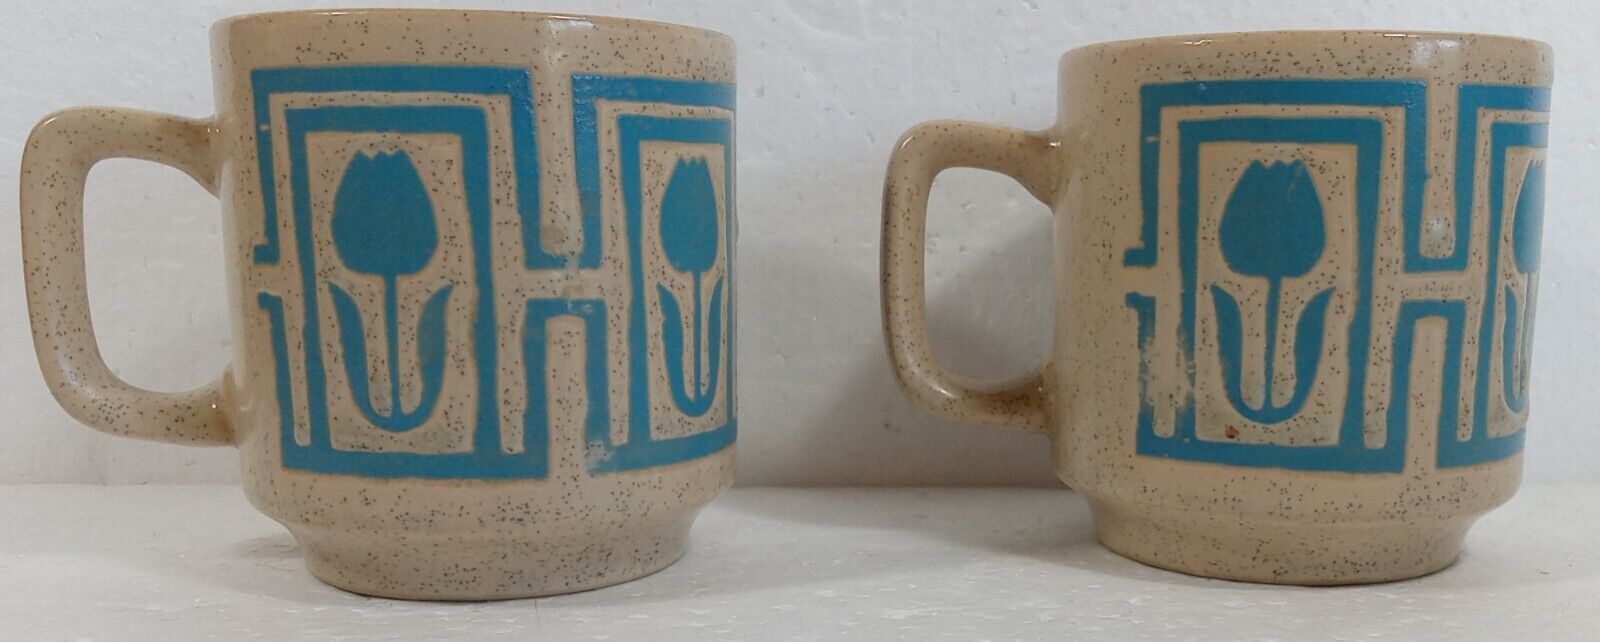 Two Vintage Pottery Coffee Mug Blue Tulips Speckled Clappison Style